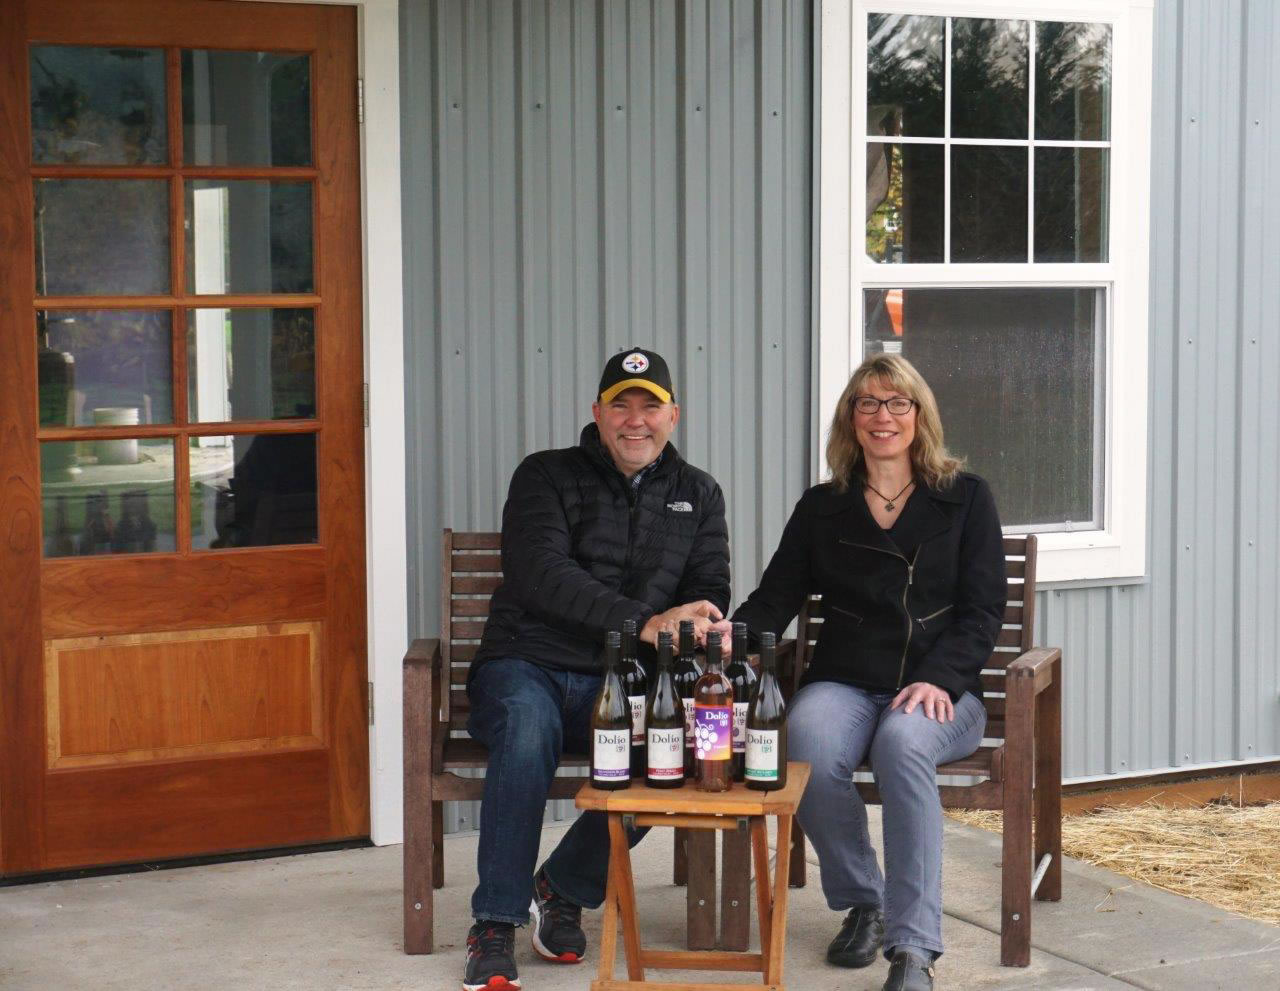 High school sweethearts who raised two boys, Don and Pam Klase will open Clark County&#039;s 17th winery -- Dolio Winery and Vineyard -- over Thanksgiving weekend.